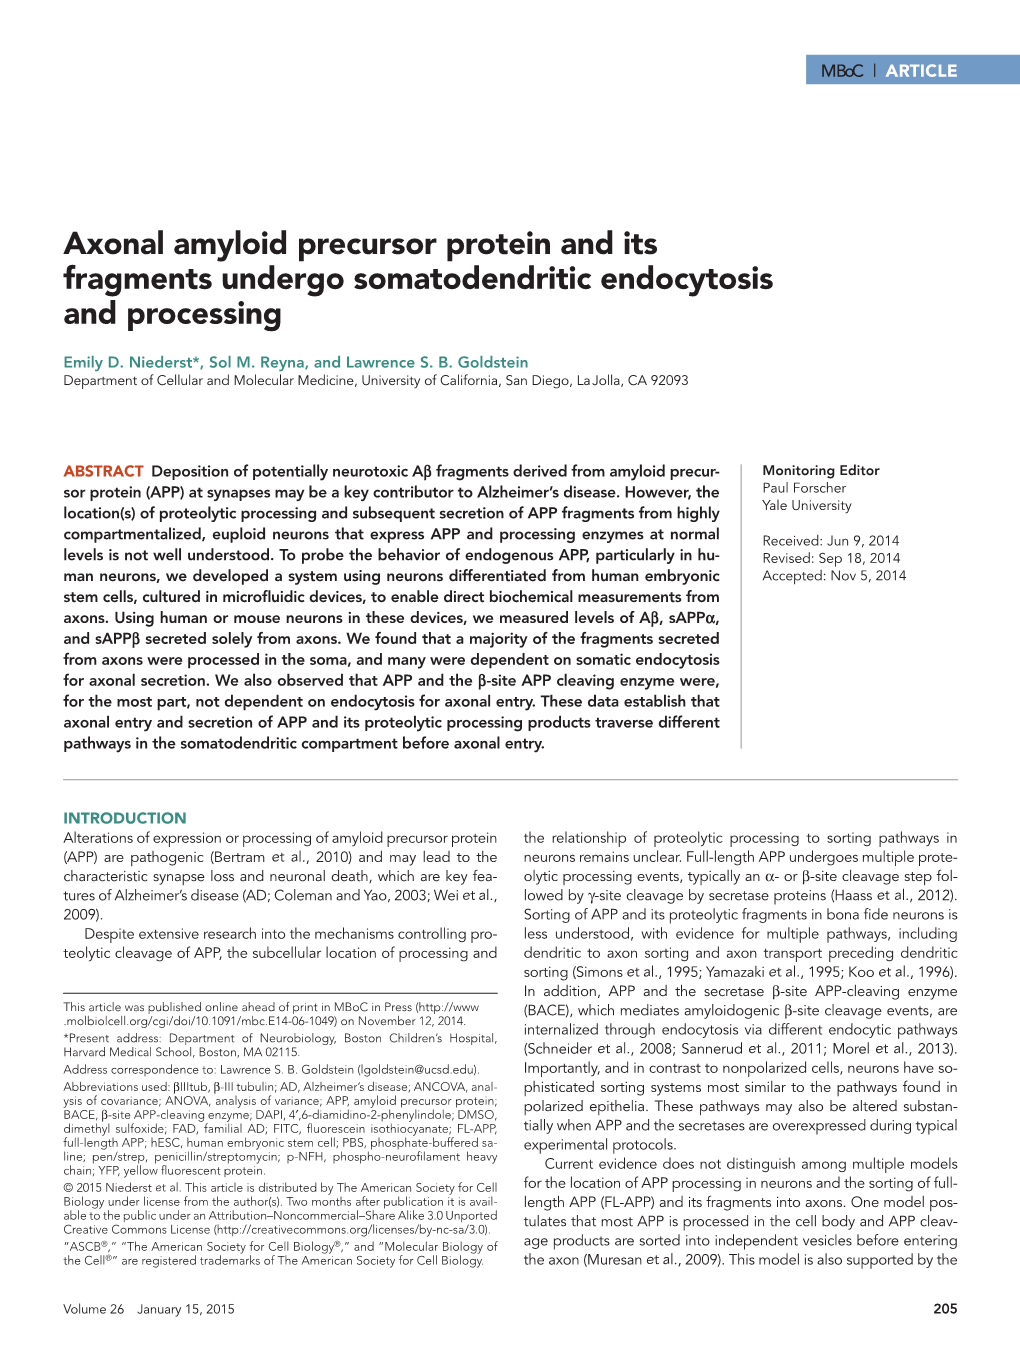 Axonal Amyloid Precursor Protein and Its Fragments Undergo Somatodendritic Endocytosis and Processing